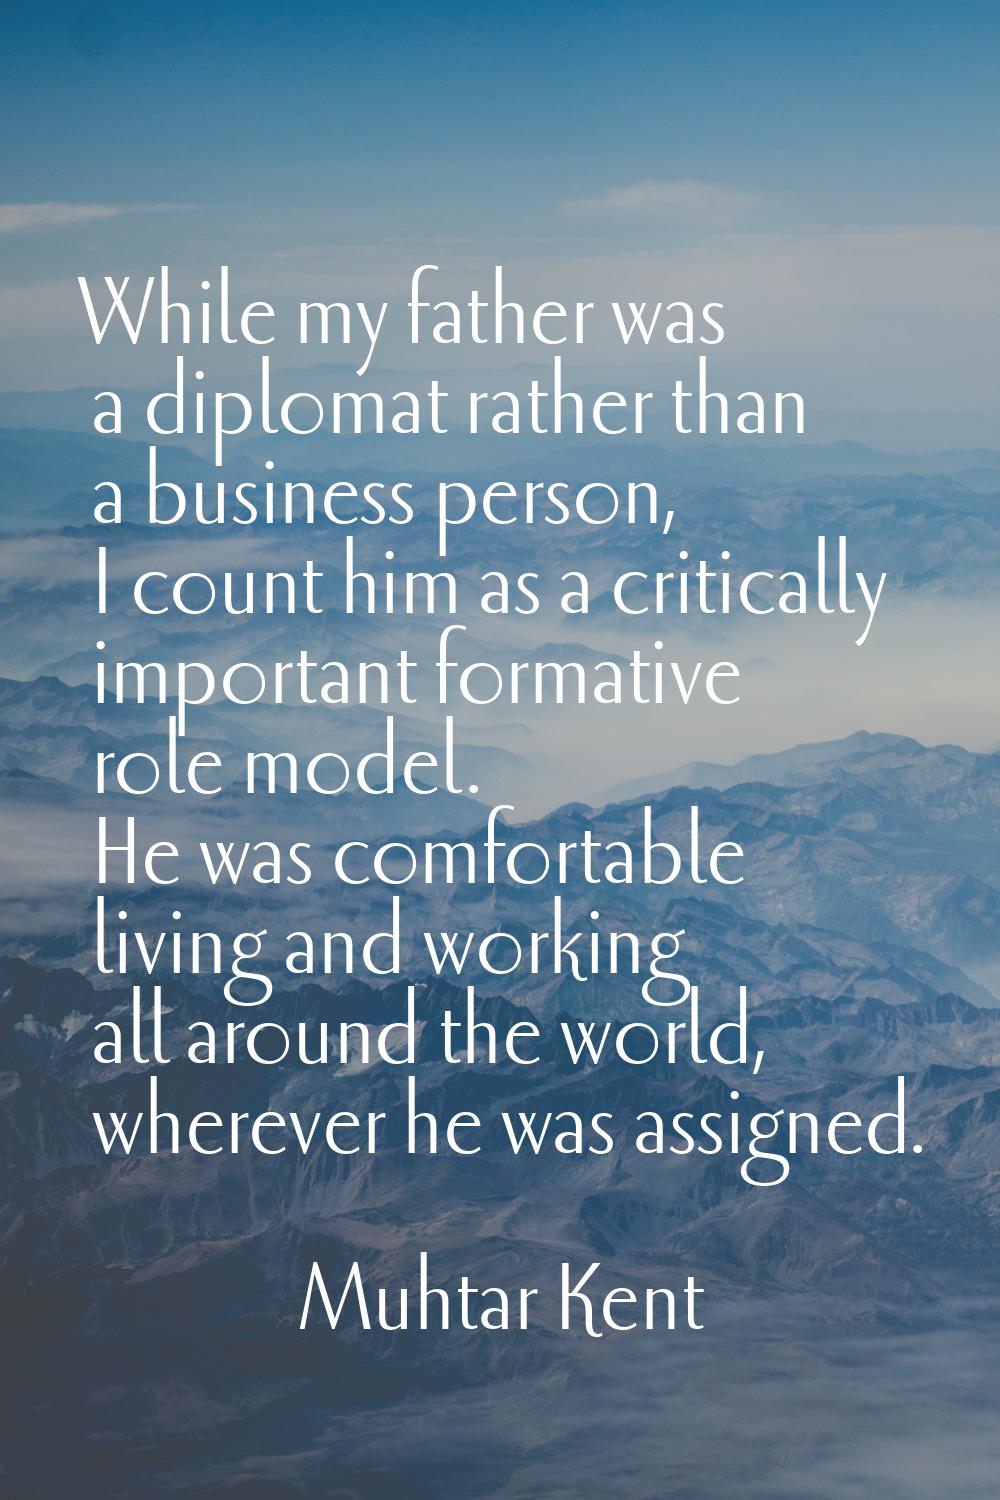 While my father was a diplomat rather than a business person, I count him as a critically important